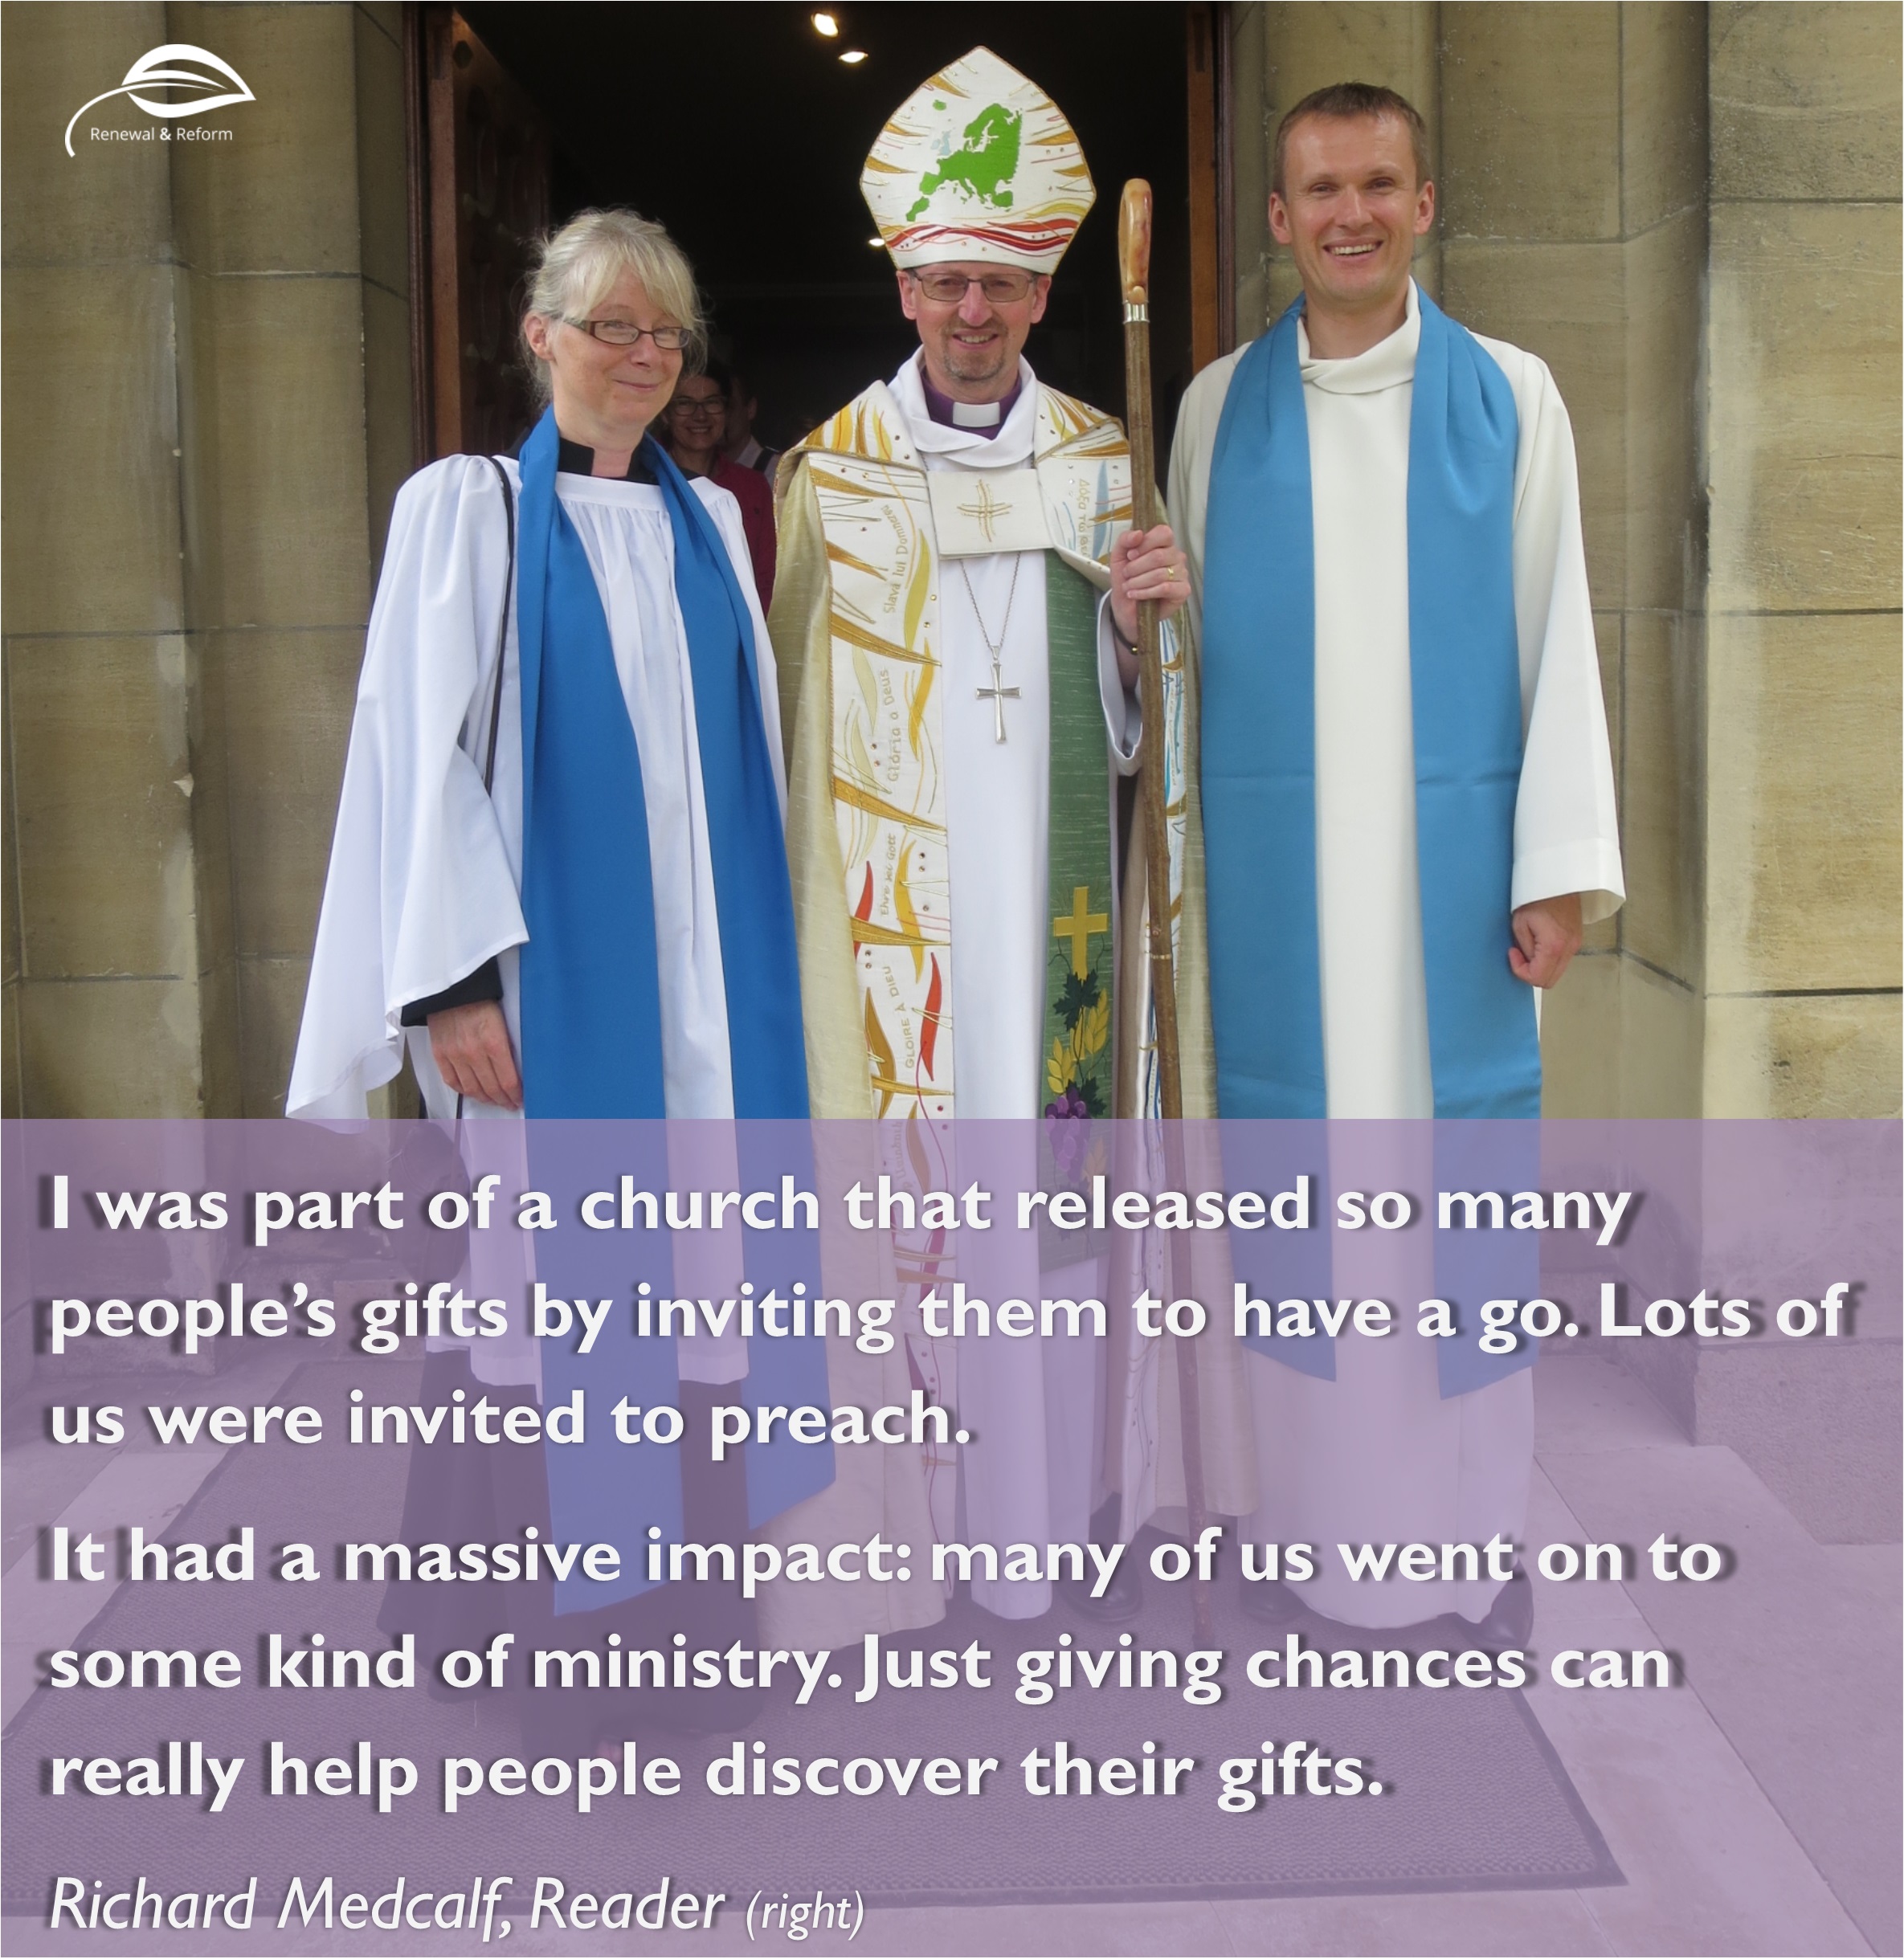 Richard Medcalf. Reader. I was part of a church that released so many people's gifts by inviting them to have a go. Lots of us were invited to preach. It had a massive impact: many of us went to some kind of ministry. Just giving chances can really help people discover their gifts.